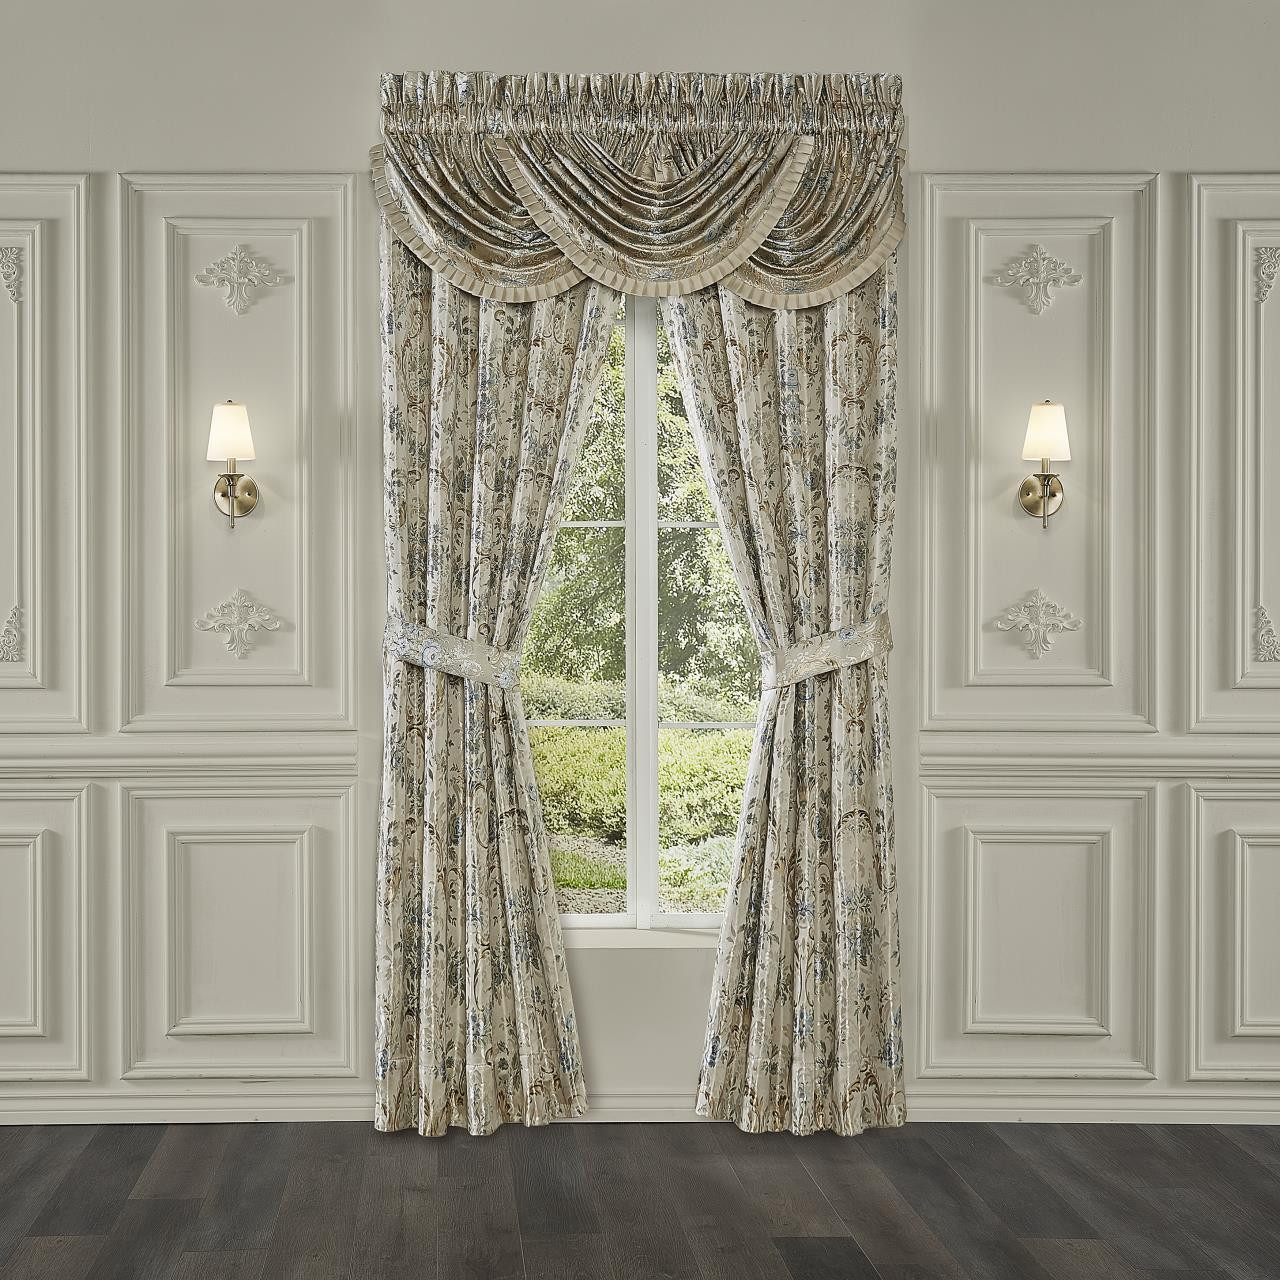 Jacqueline Teal Waterfall Valance - 193842117323